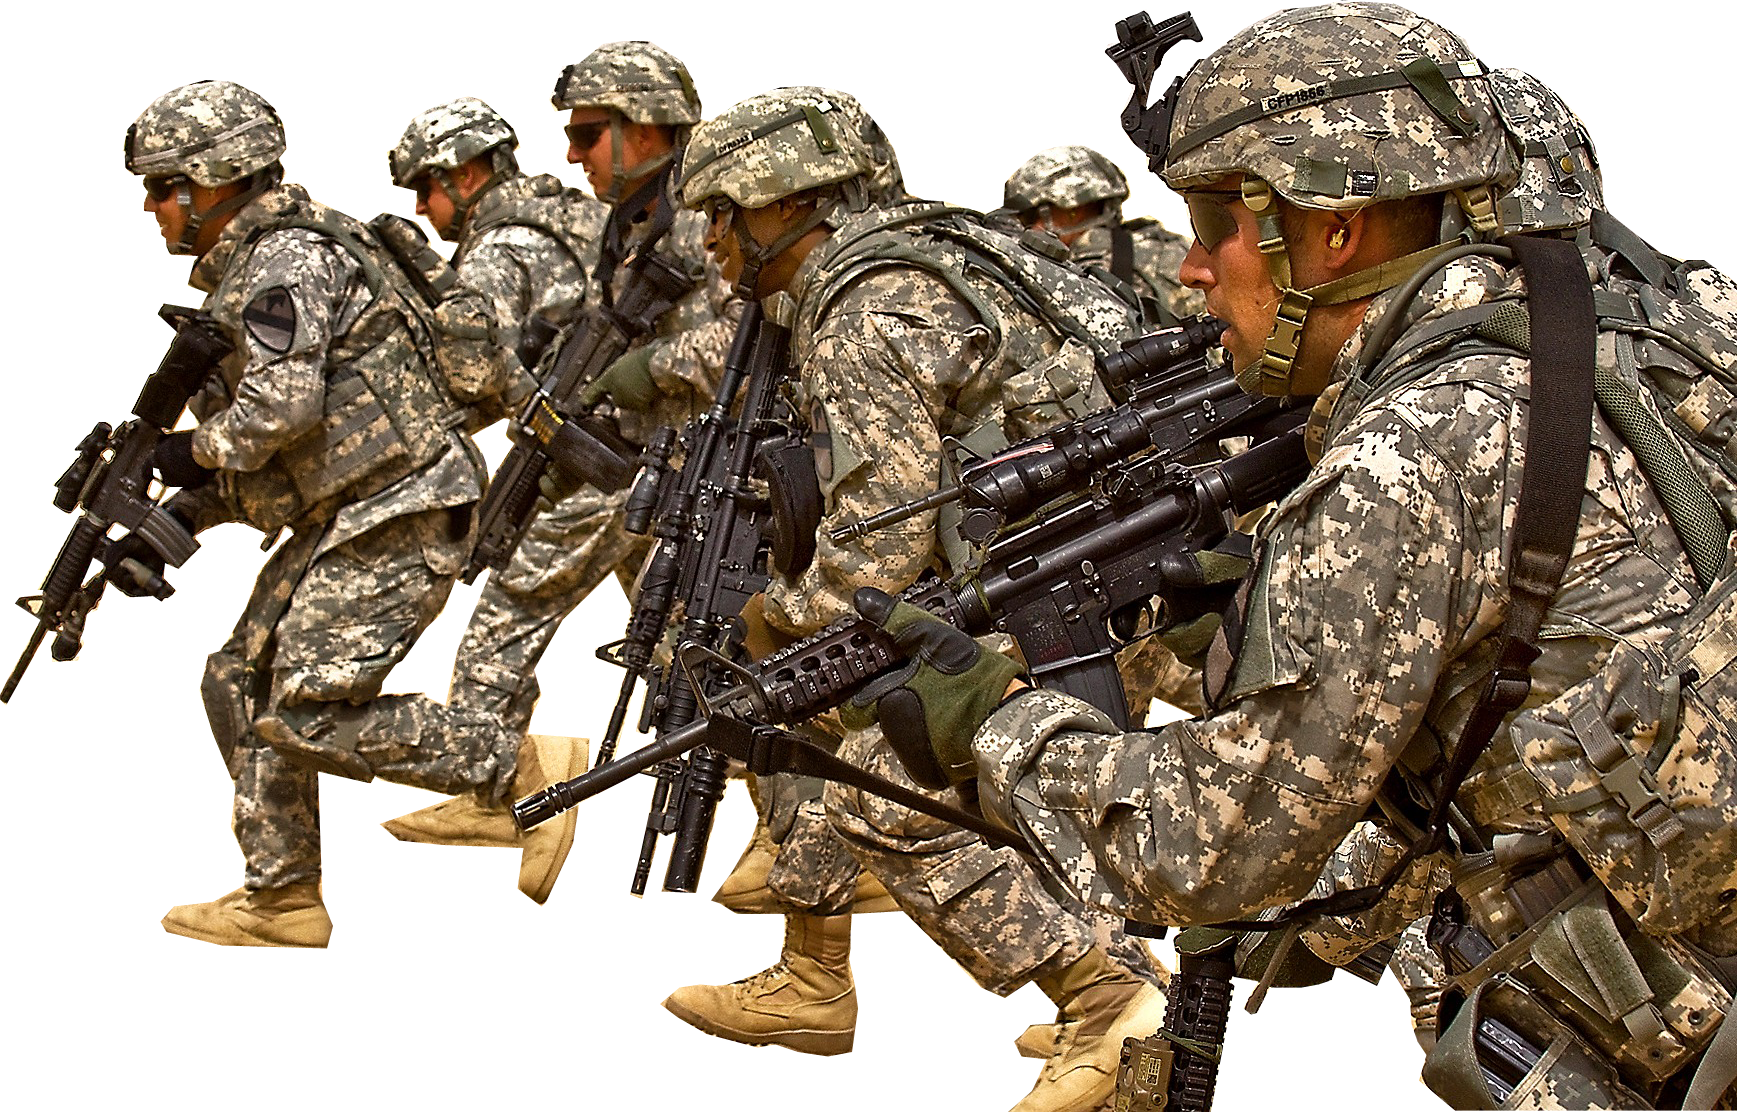 gun, toy soldiers, army png background full hd 1080p